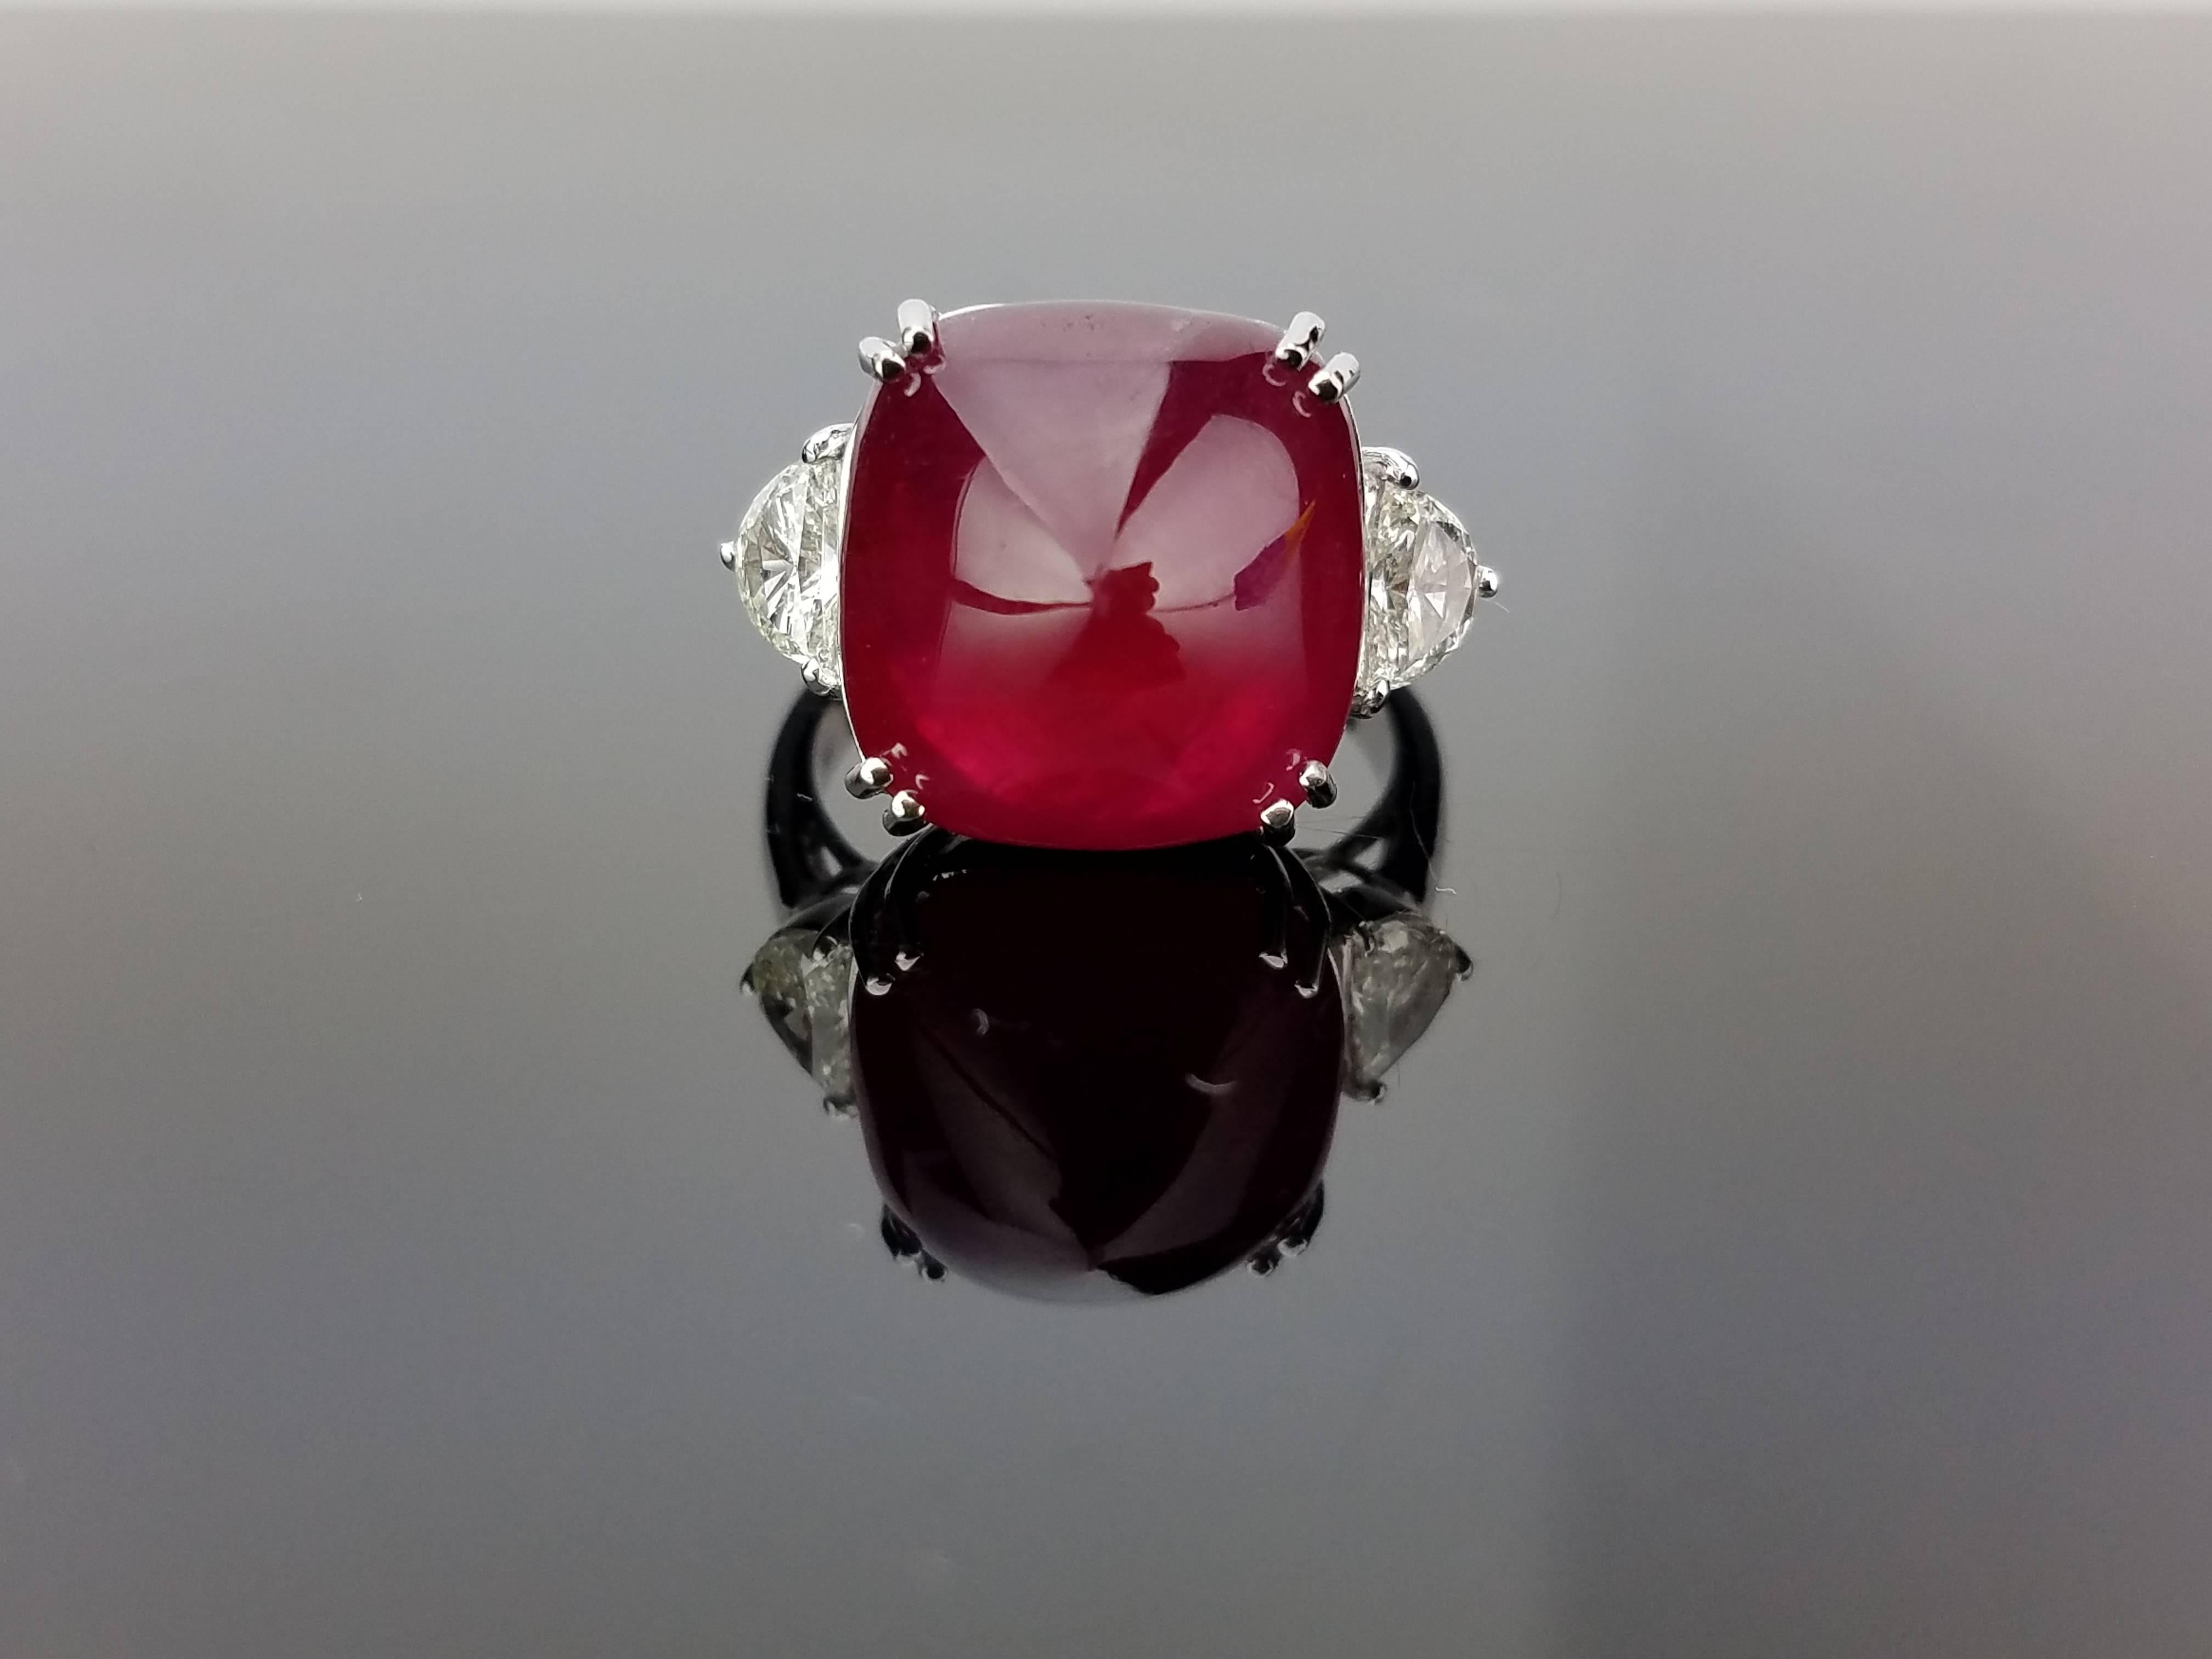 An elegant cocktail ring using a sugarloaf African Ruby centre stone and two half-moon diamond side stones, all set in 18K white gold. 

Stone Details: 
Stone: African Ruby
Carat Weight: 18.62 Carats

Diamond Details: 
Total Carat Weight: 0.61